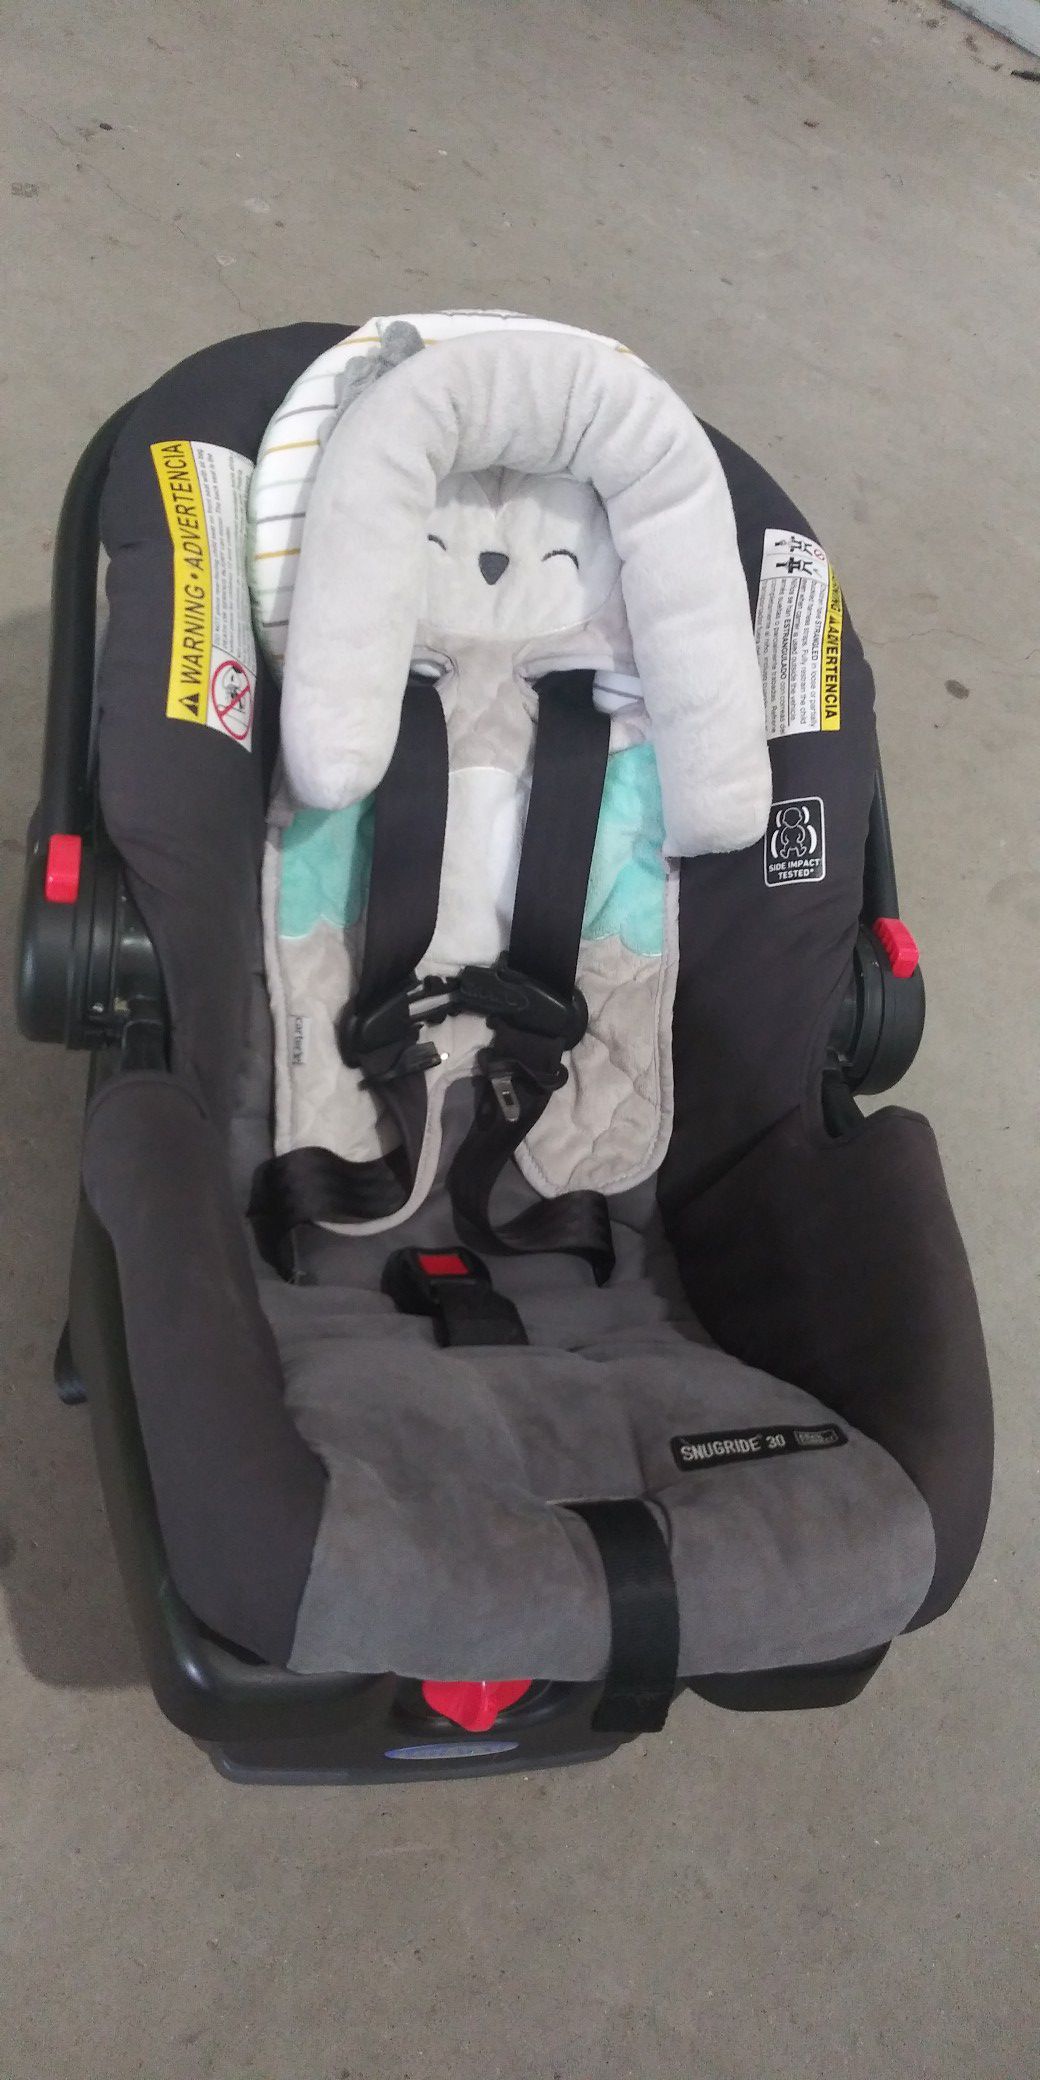 Graco Snugride 30 Carseat and Stroller set